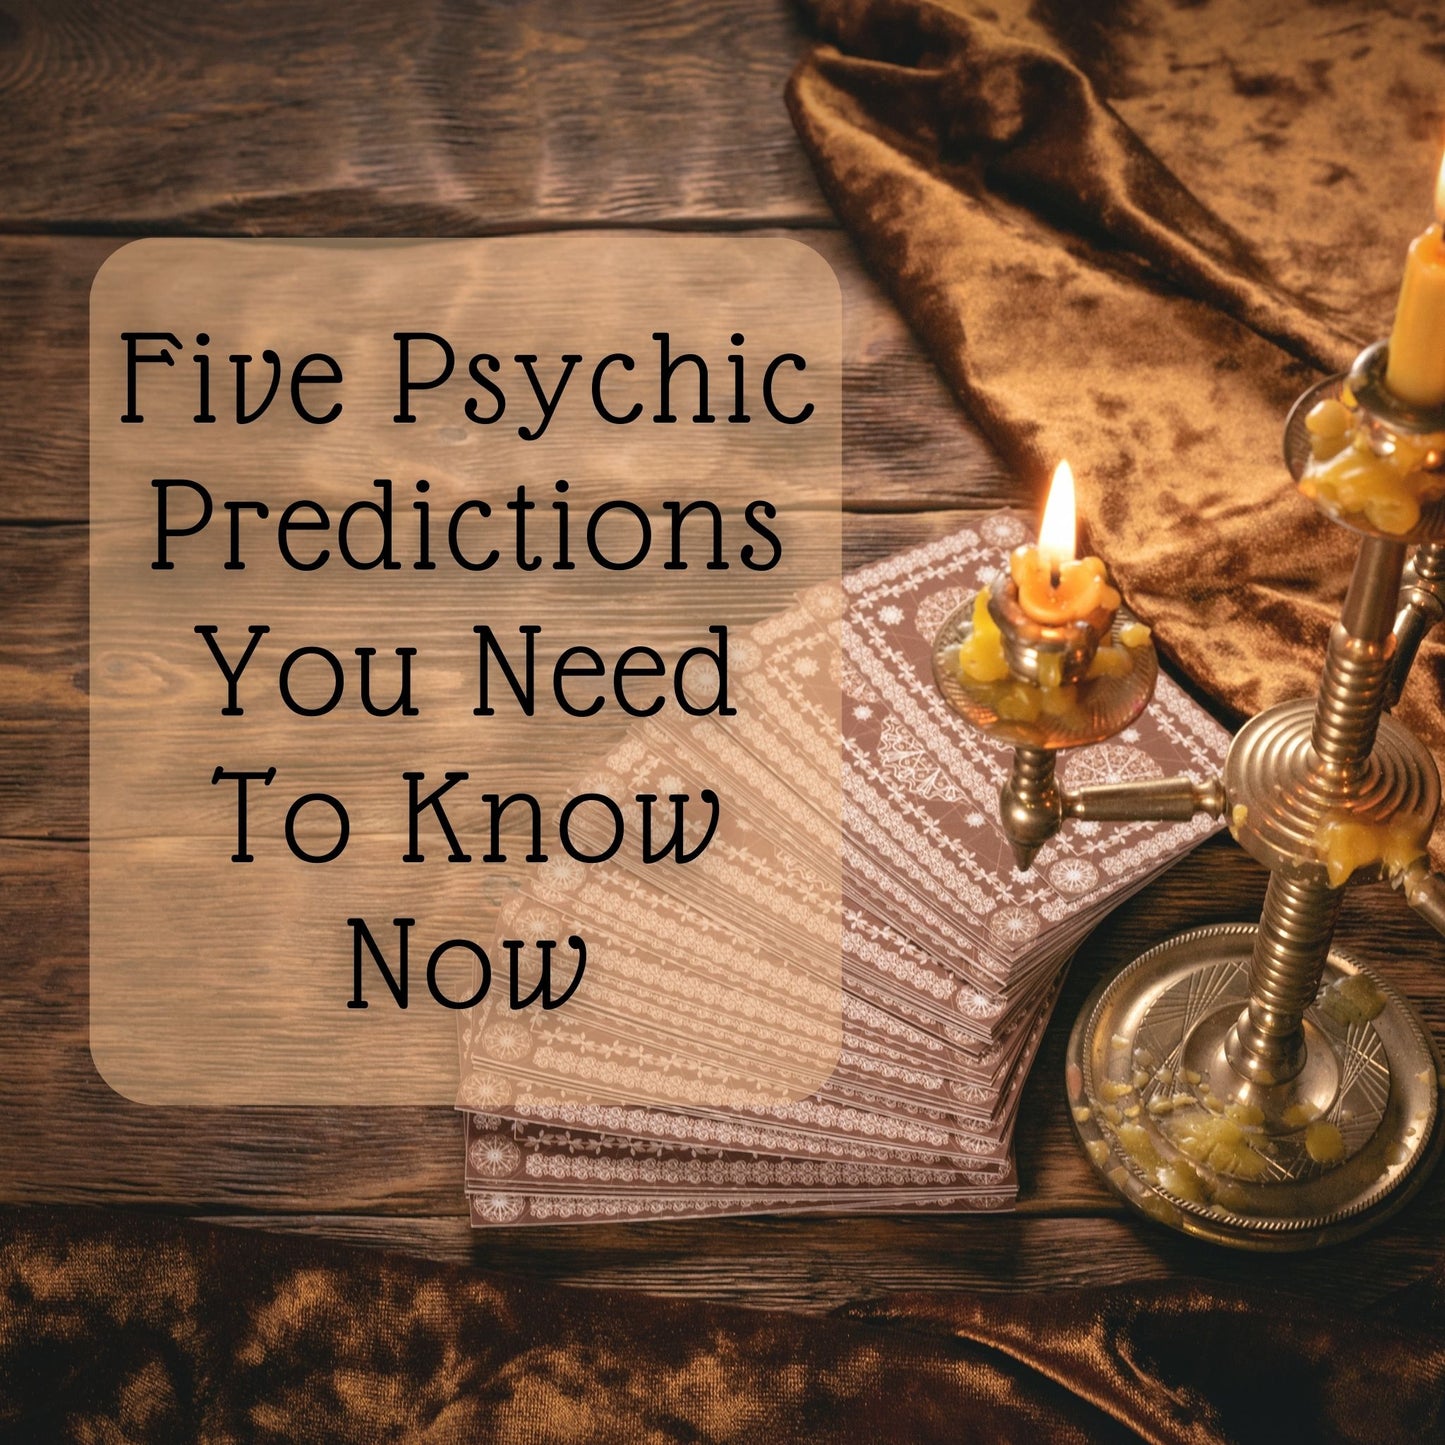 Five Psychic Predictions That You Need to Know Now